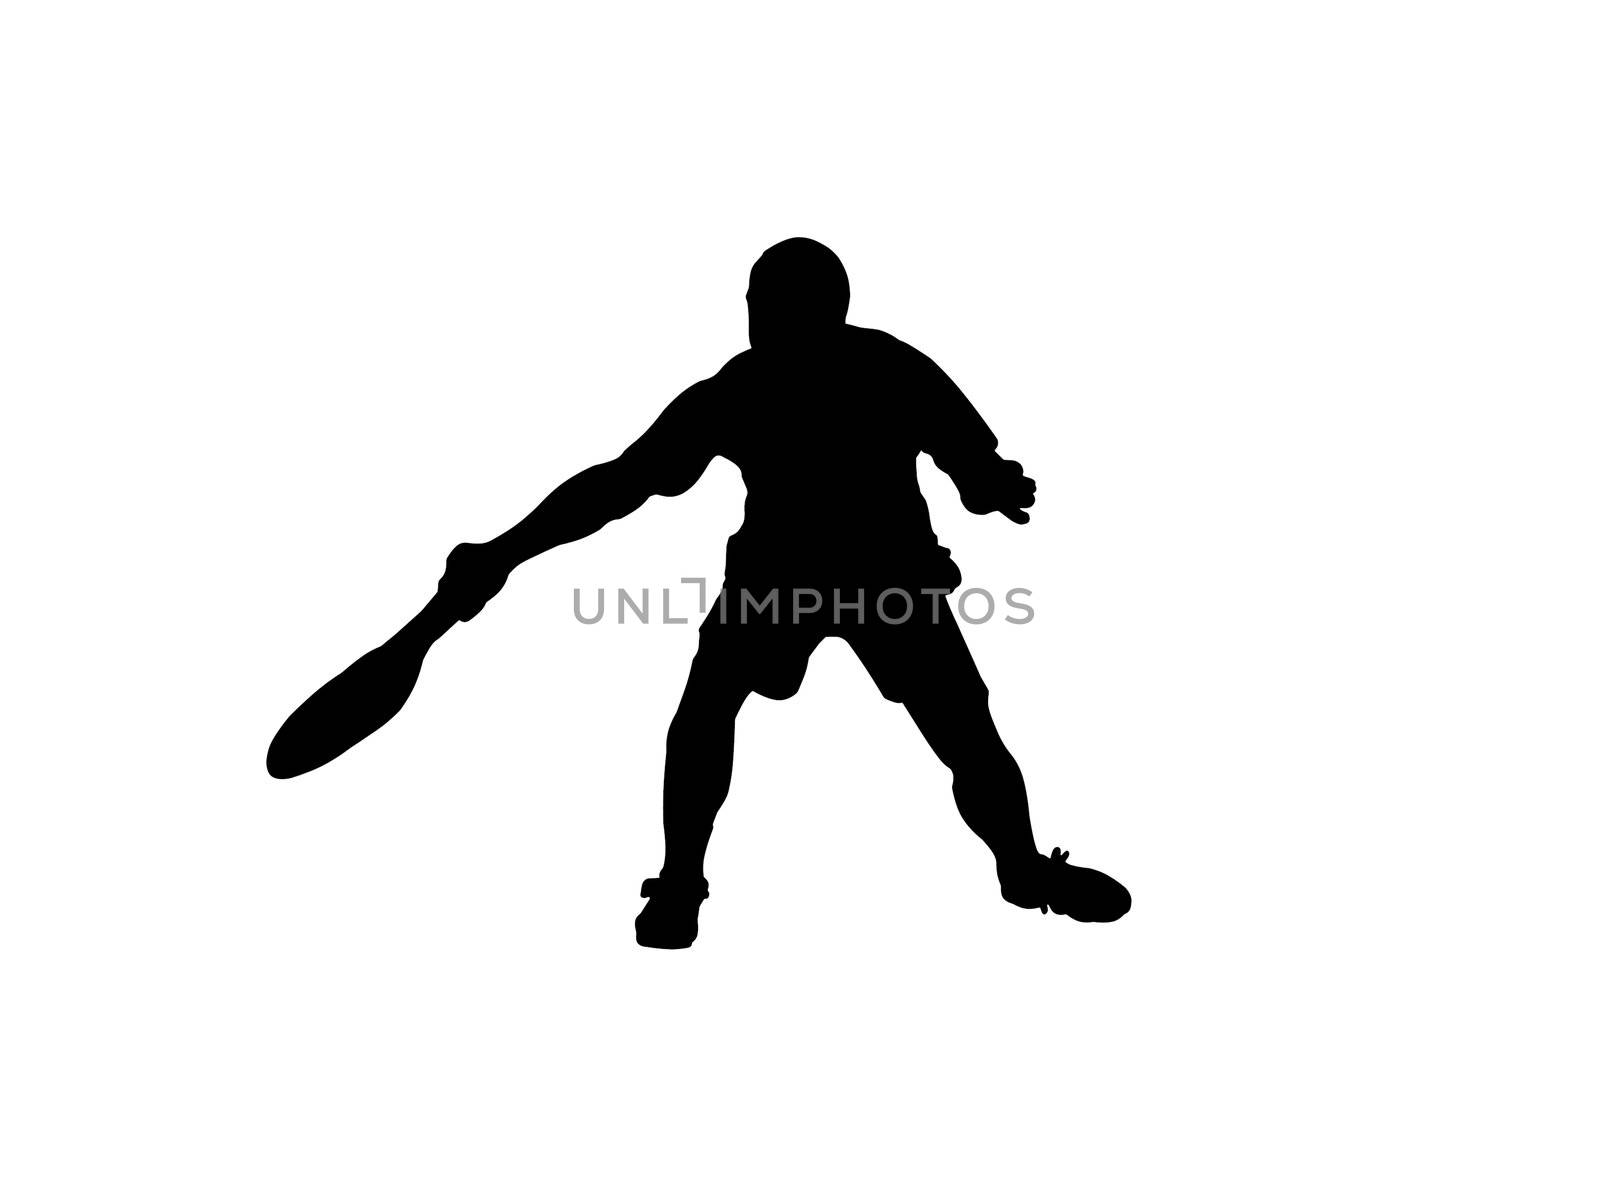 Silhouette of a tennis player over white background